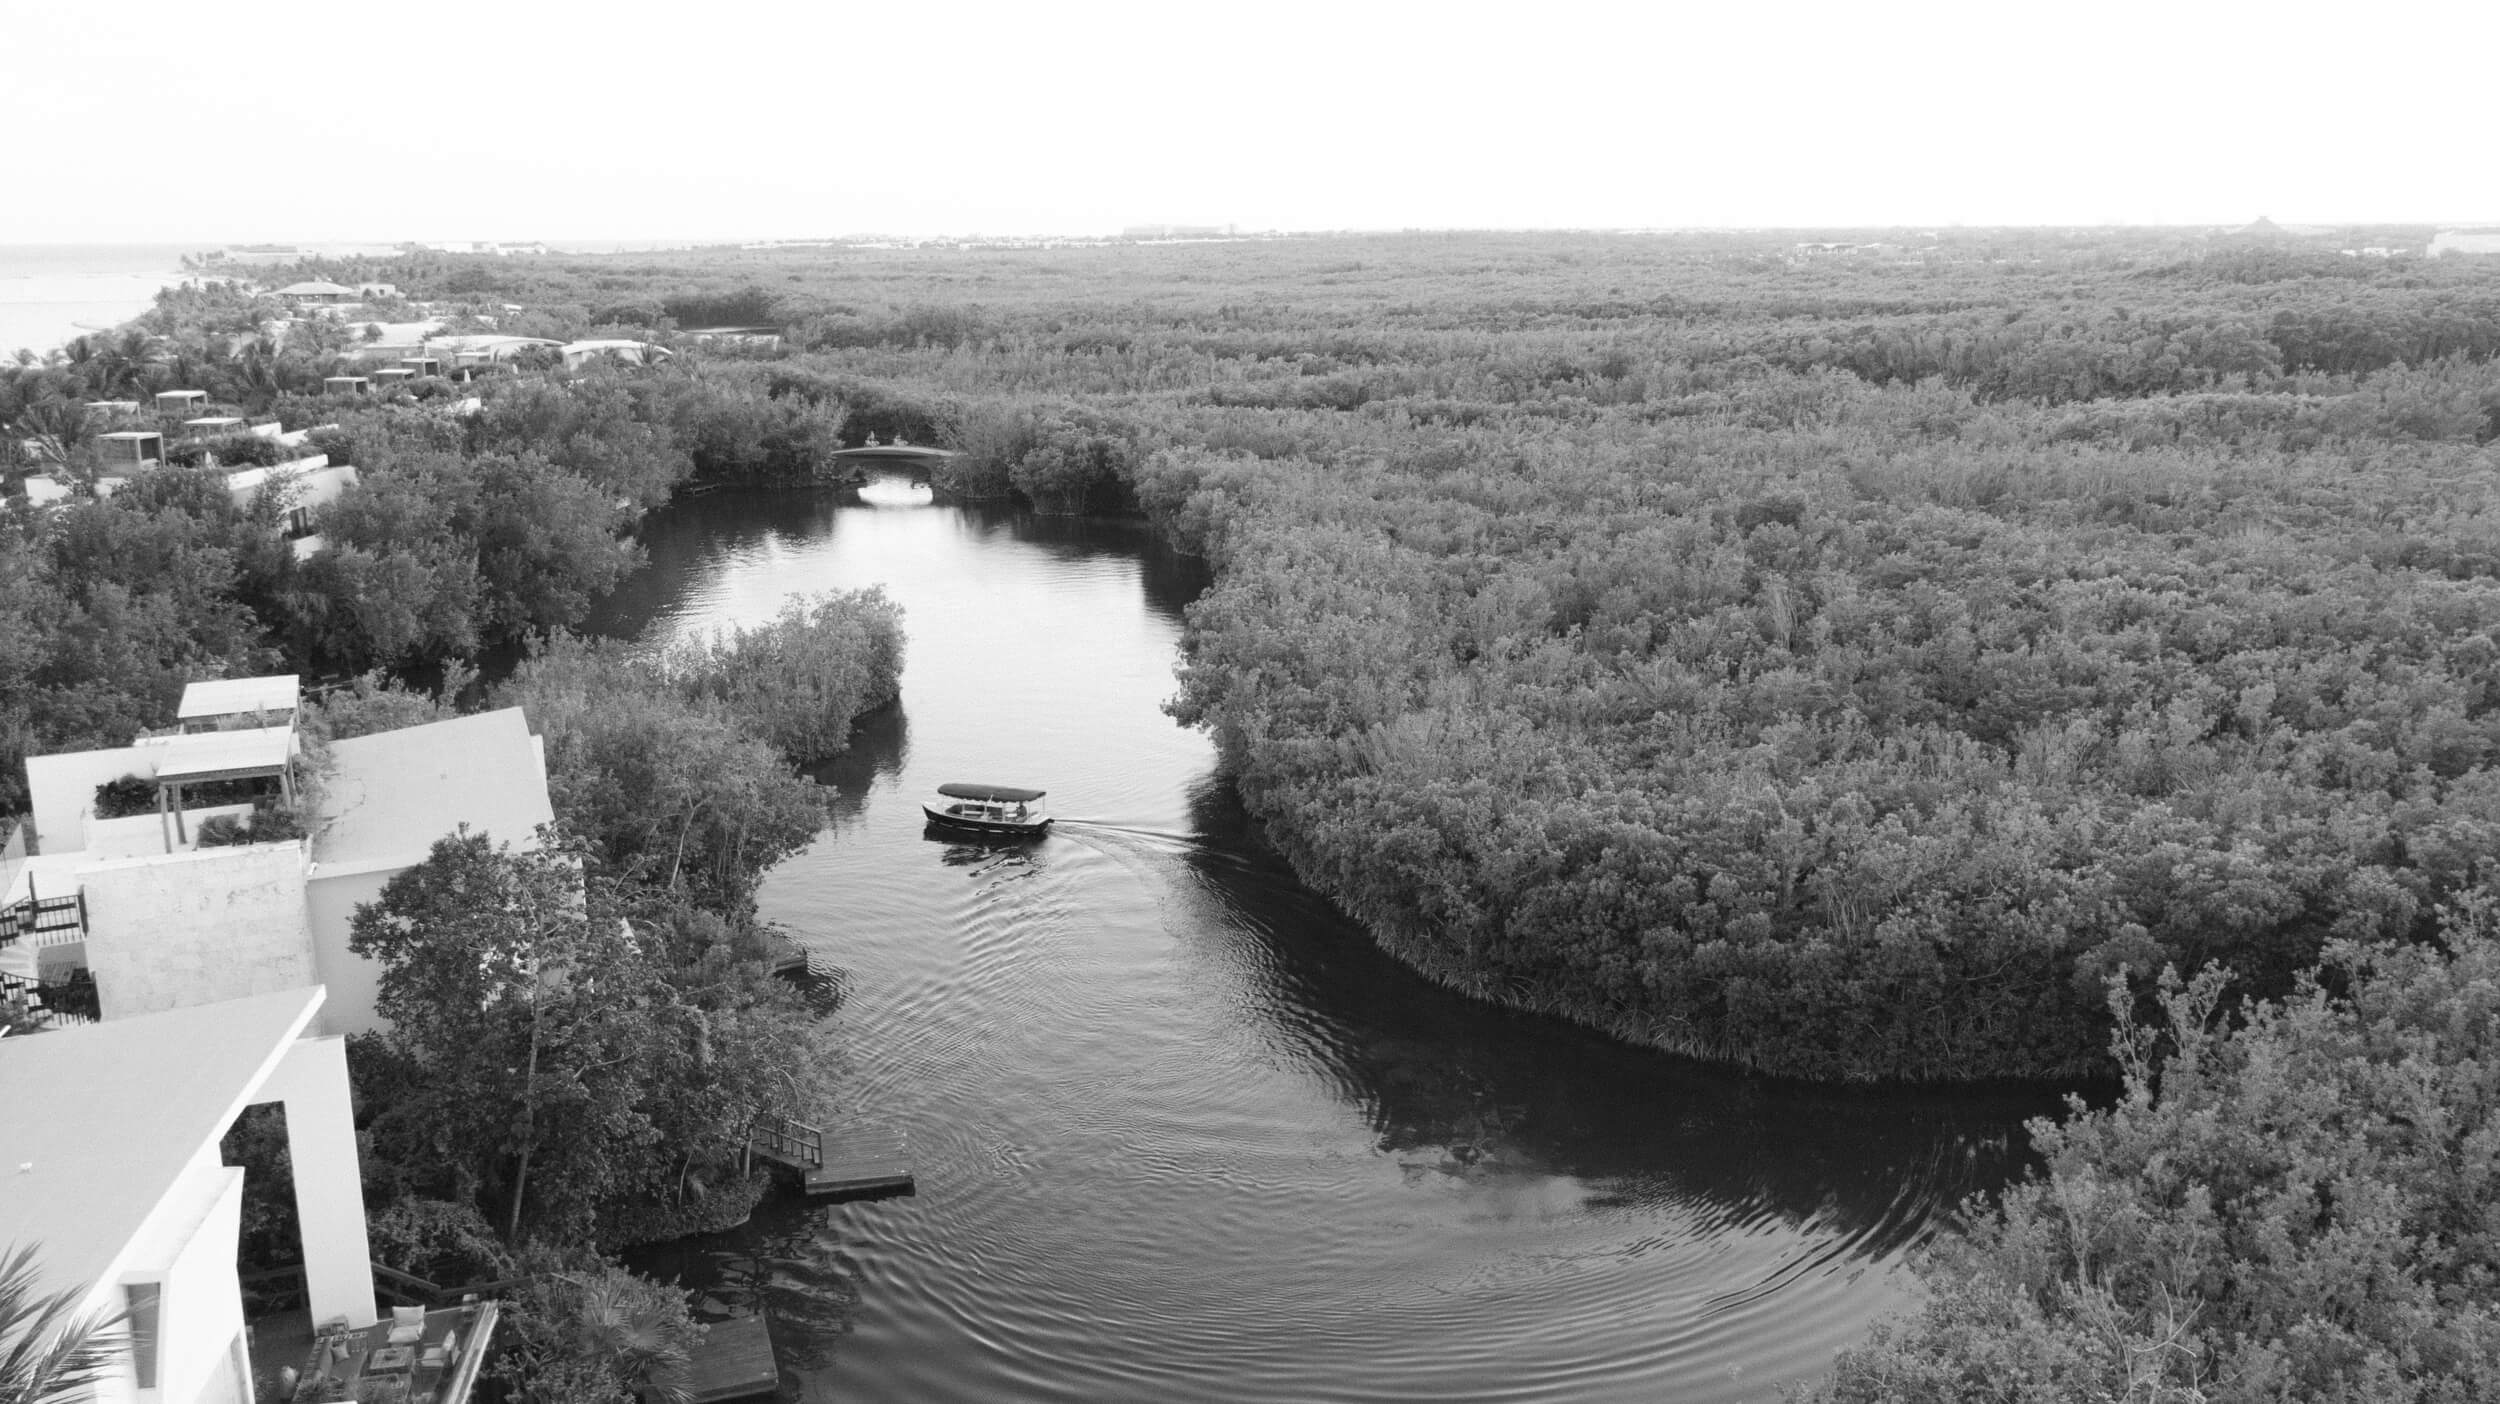 Aerial shot of a boat on a river